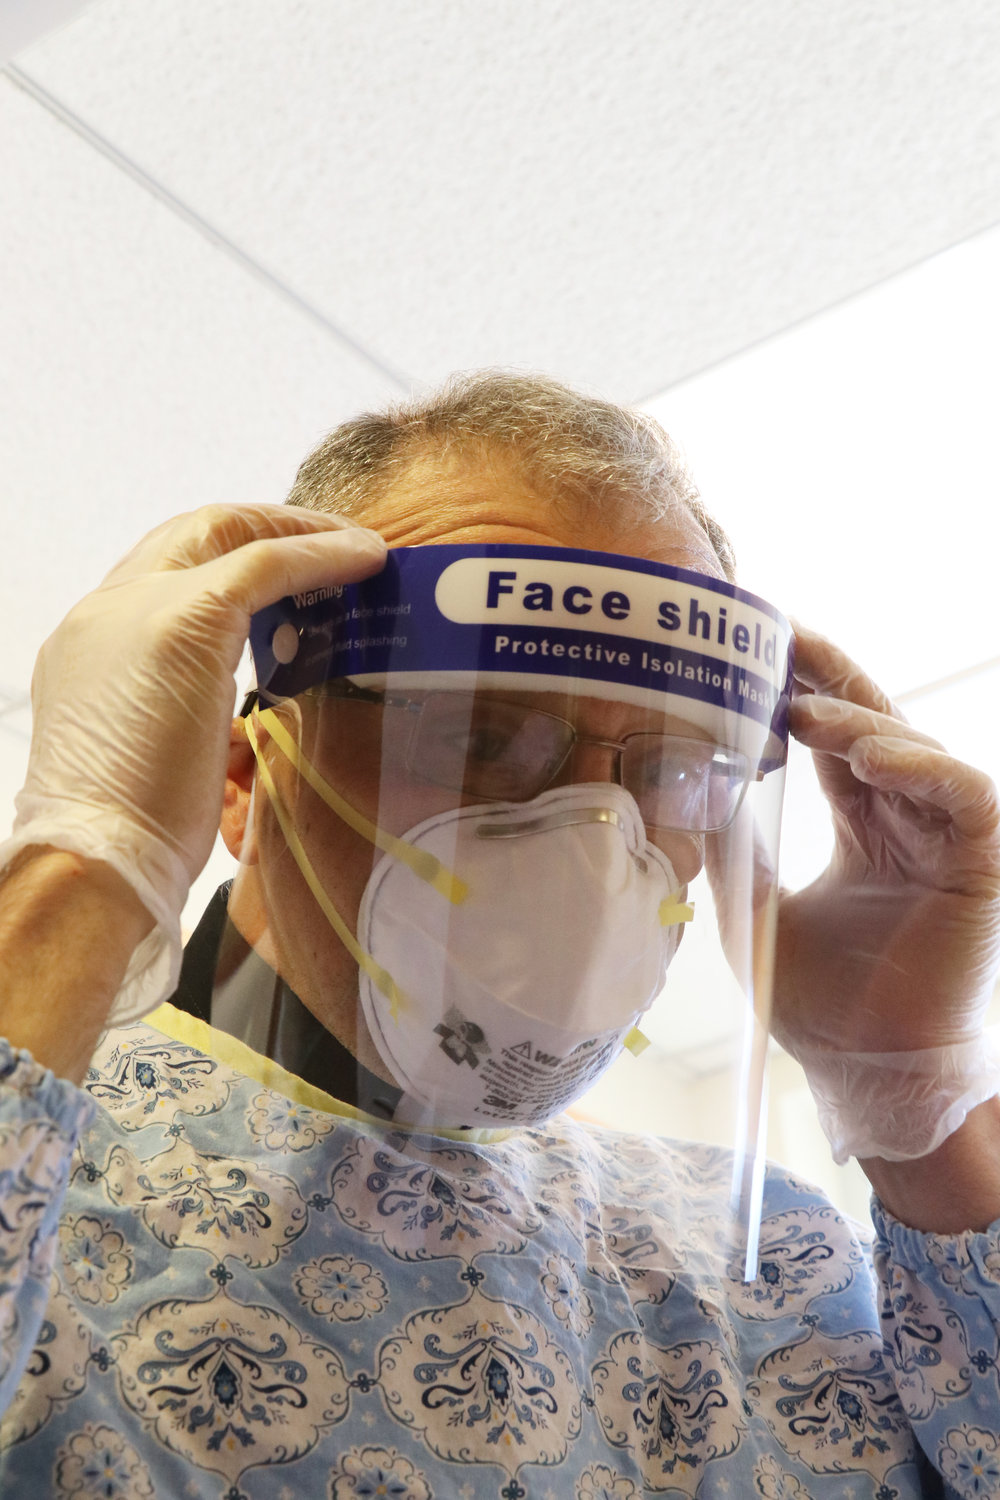 Albert Ranallo, coordinator for Pastoral Care for Health Facilities in the Diocese of Providence, adjusts his protective face shield as he suits up to minister to patients on the COVID-19 floor of the hospice facility.